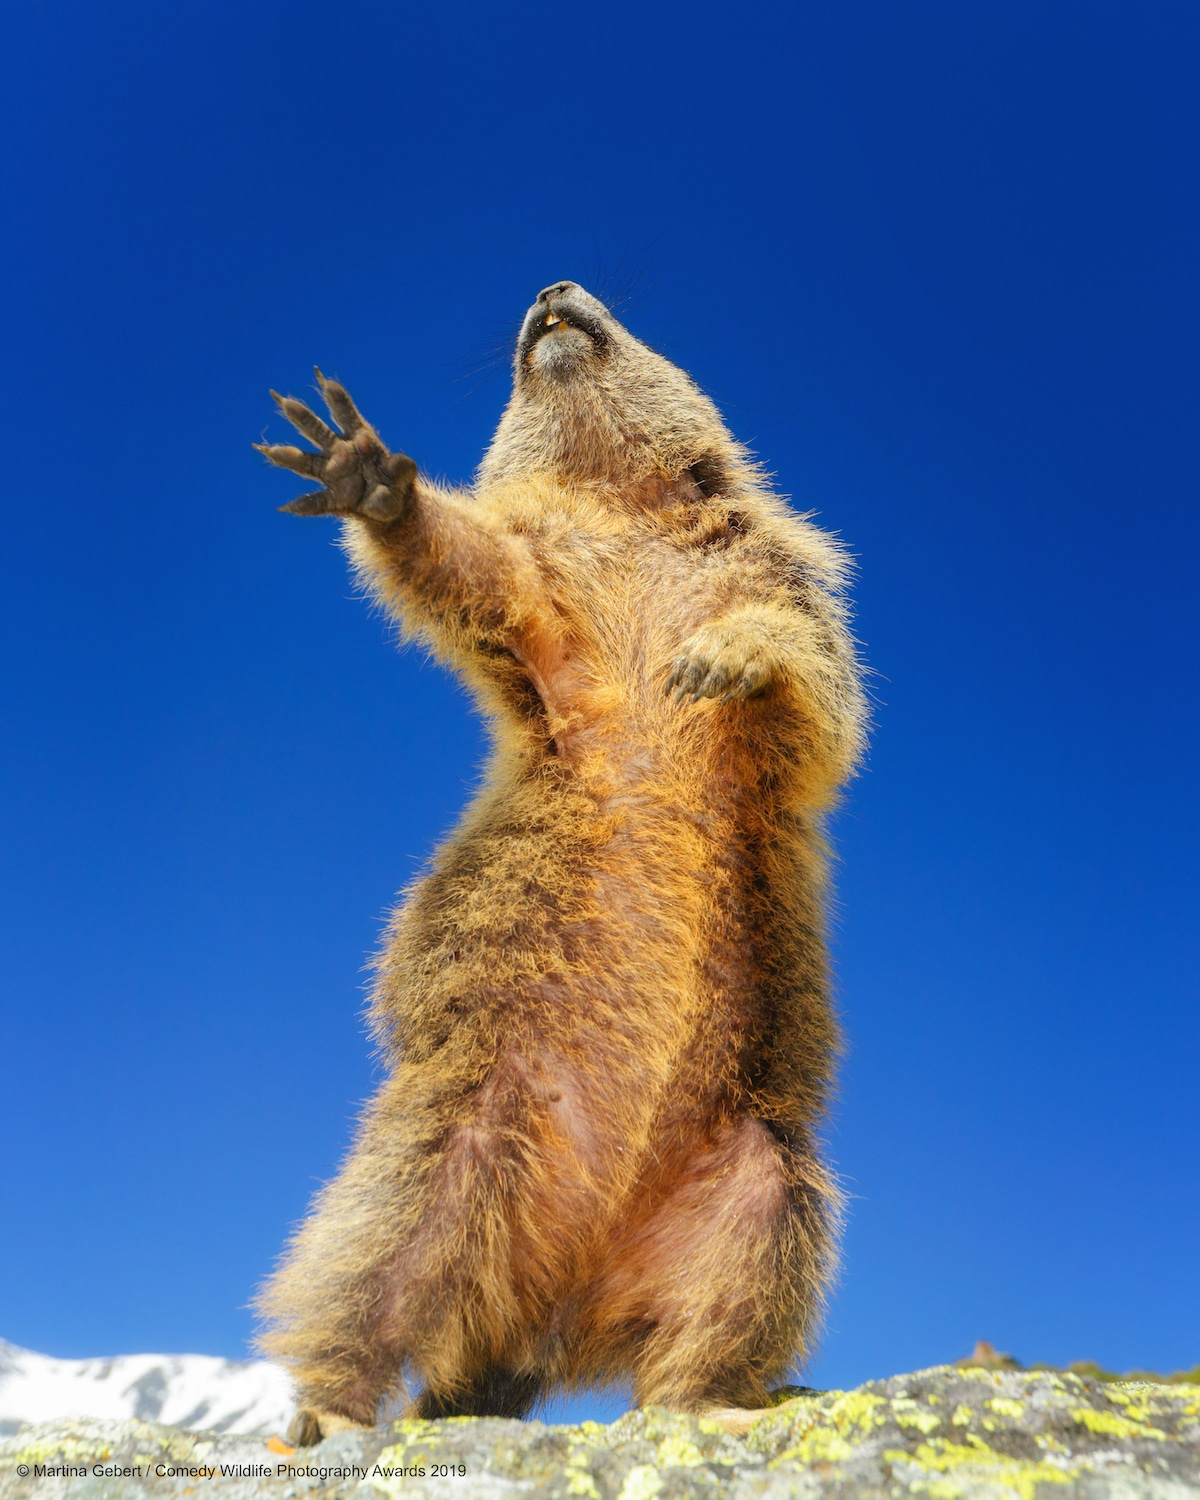 2019 Finalists Comedy Wildlife Photography Awards